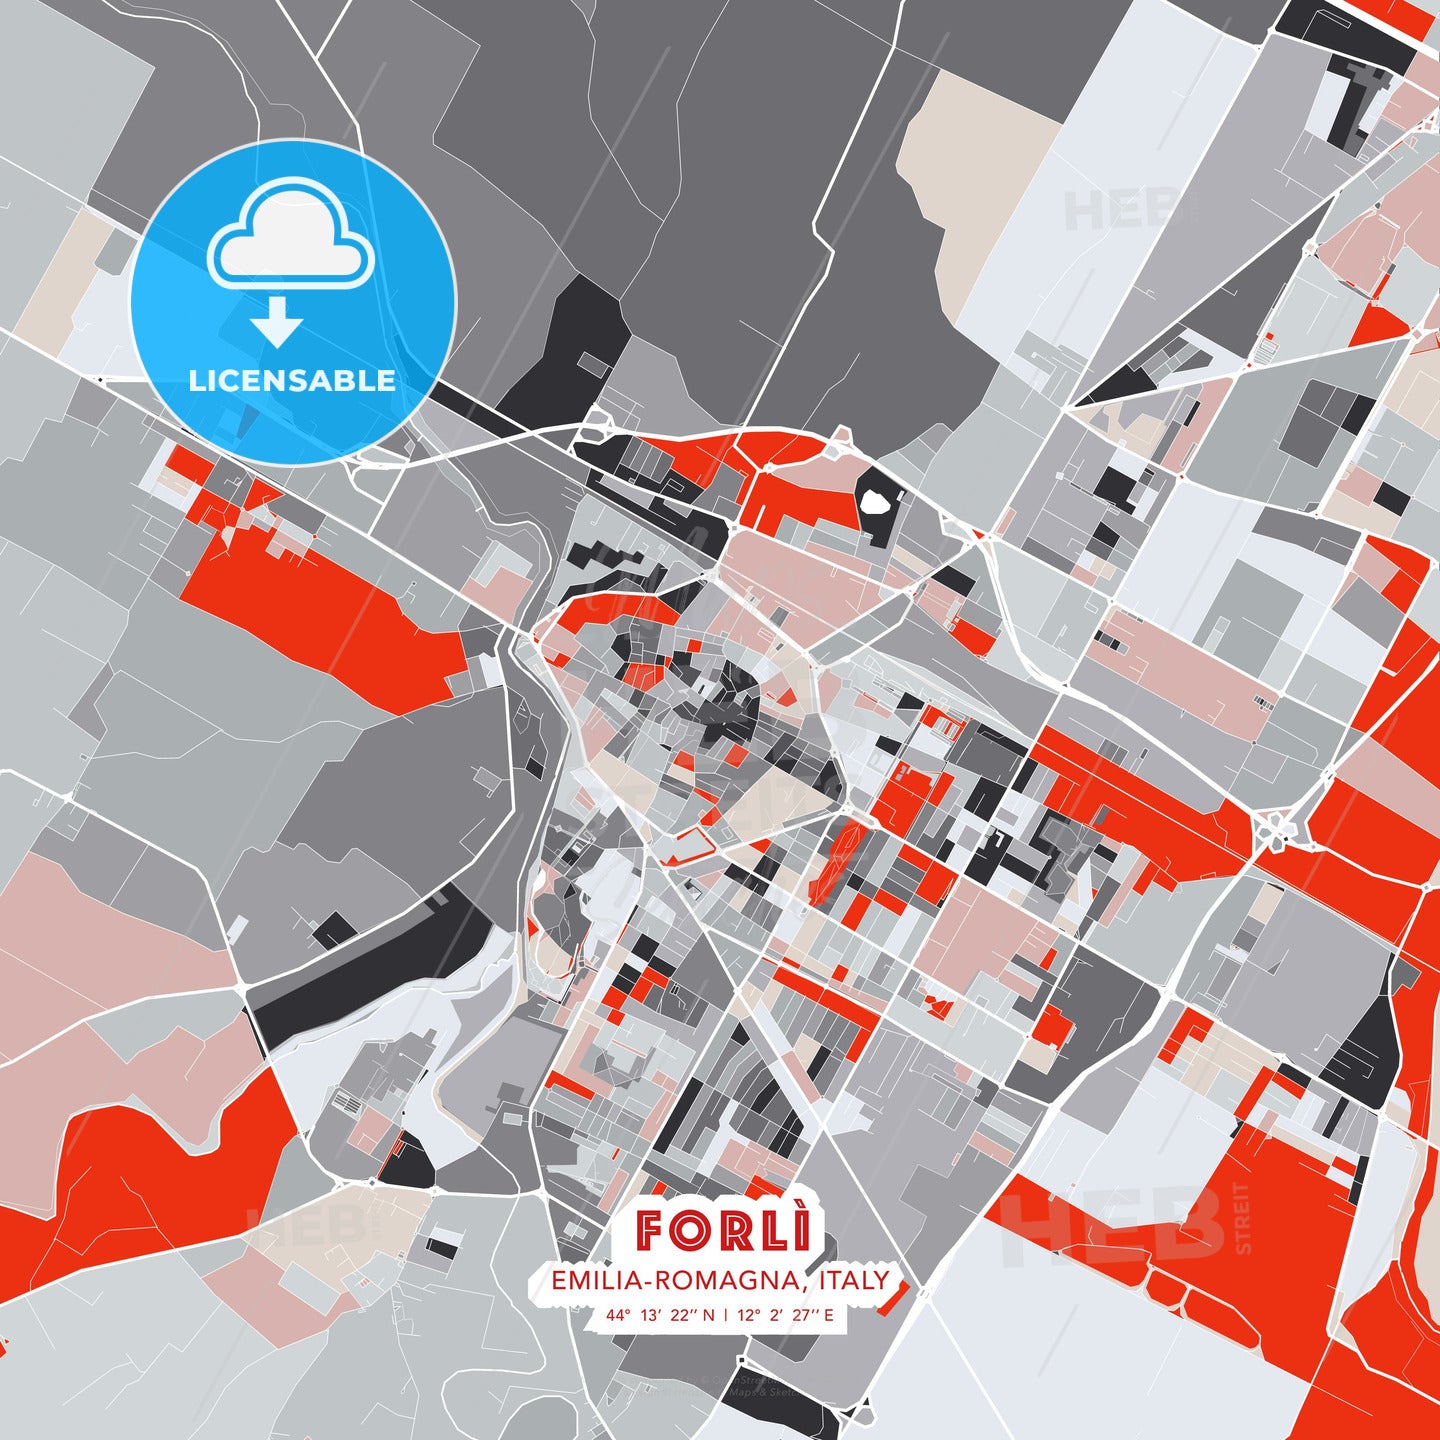 Forlì, Emilia-Romagna, Italy, modern map - HEBSTREITS Sketches